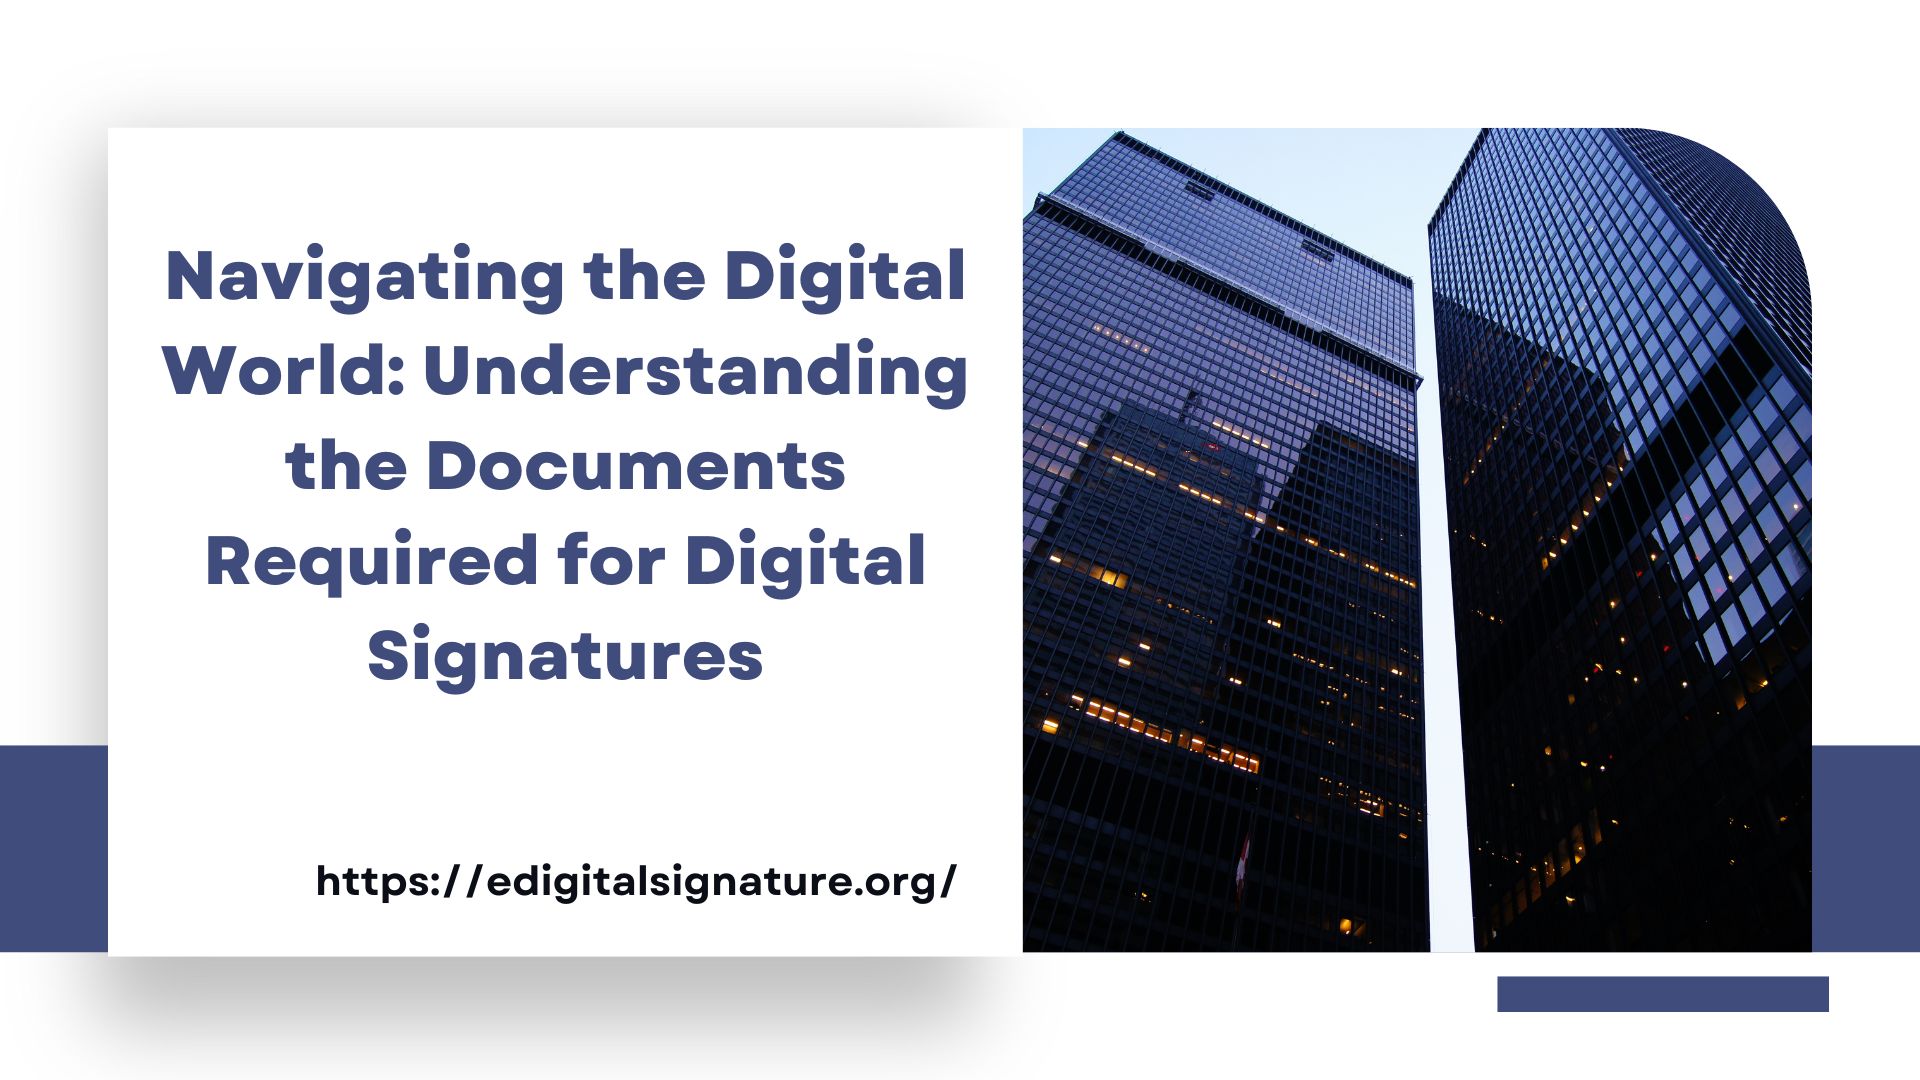 Navigating the Digital World: Understanding the Documents Required for Digital Signatures